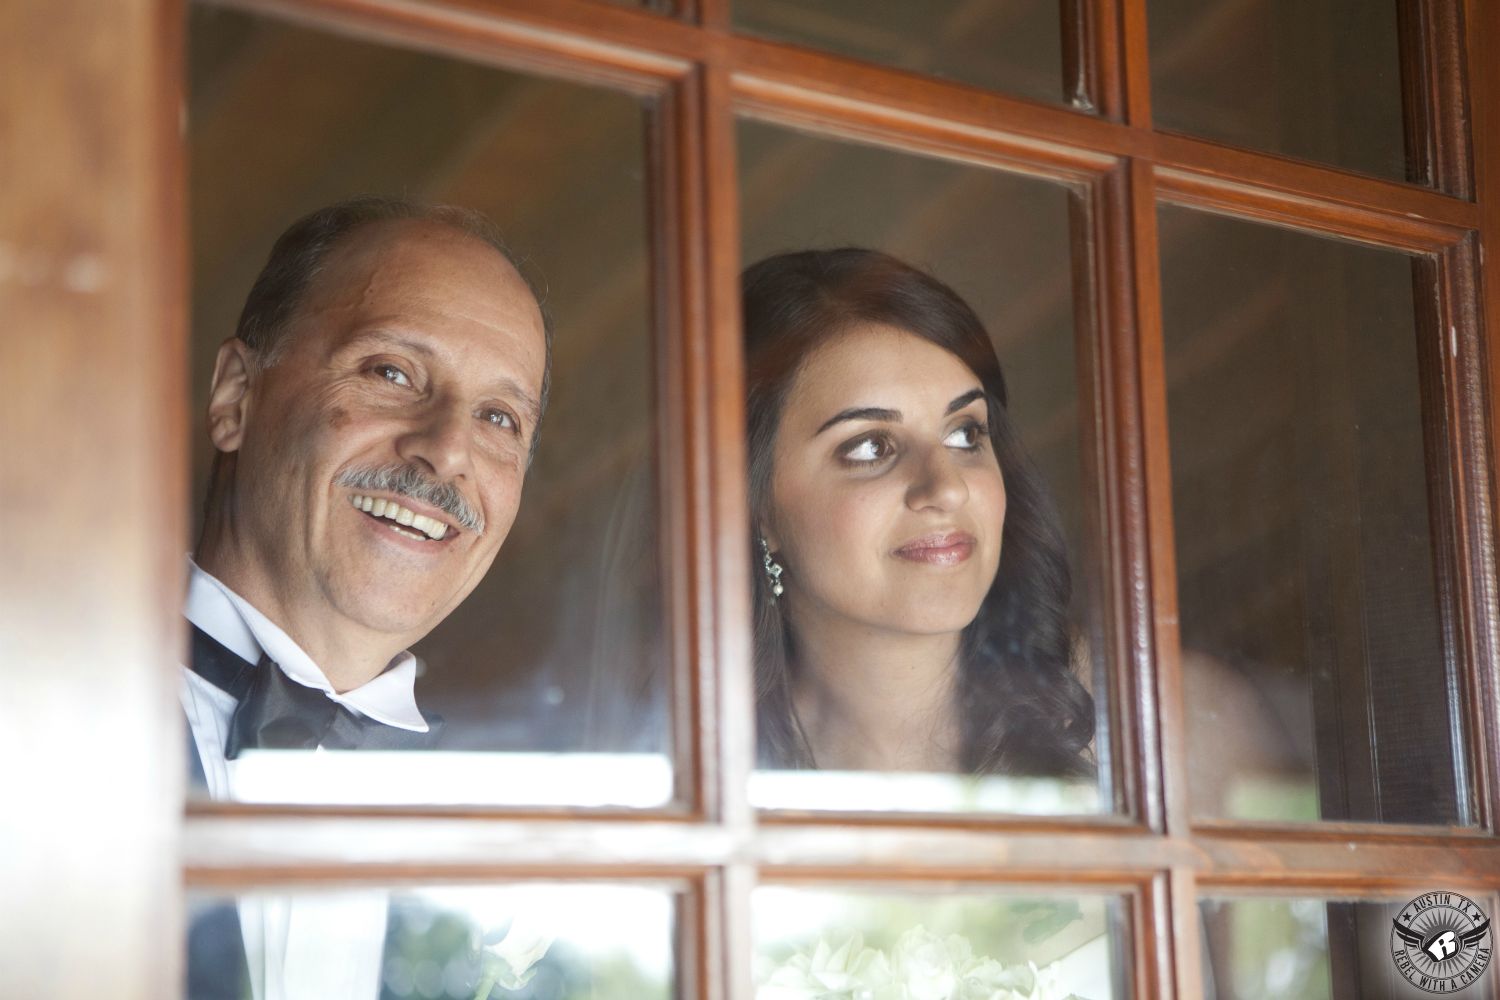 Bride and her father in black tuxedo look out of the window just before he walks her down the aisle to the wedding ceremony at the Grande Hall at Hofmann Ranch wedding venue in San Antonio, Texas.